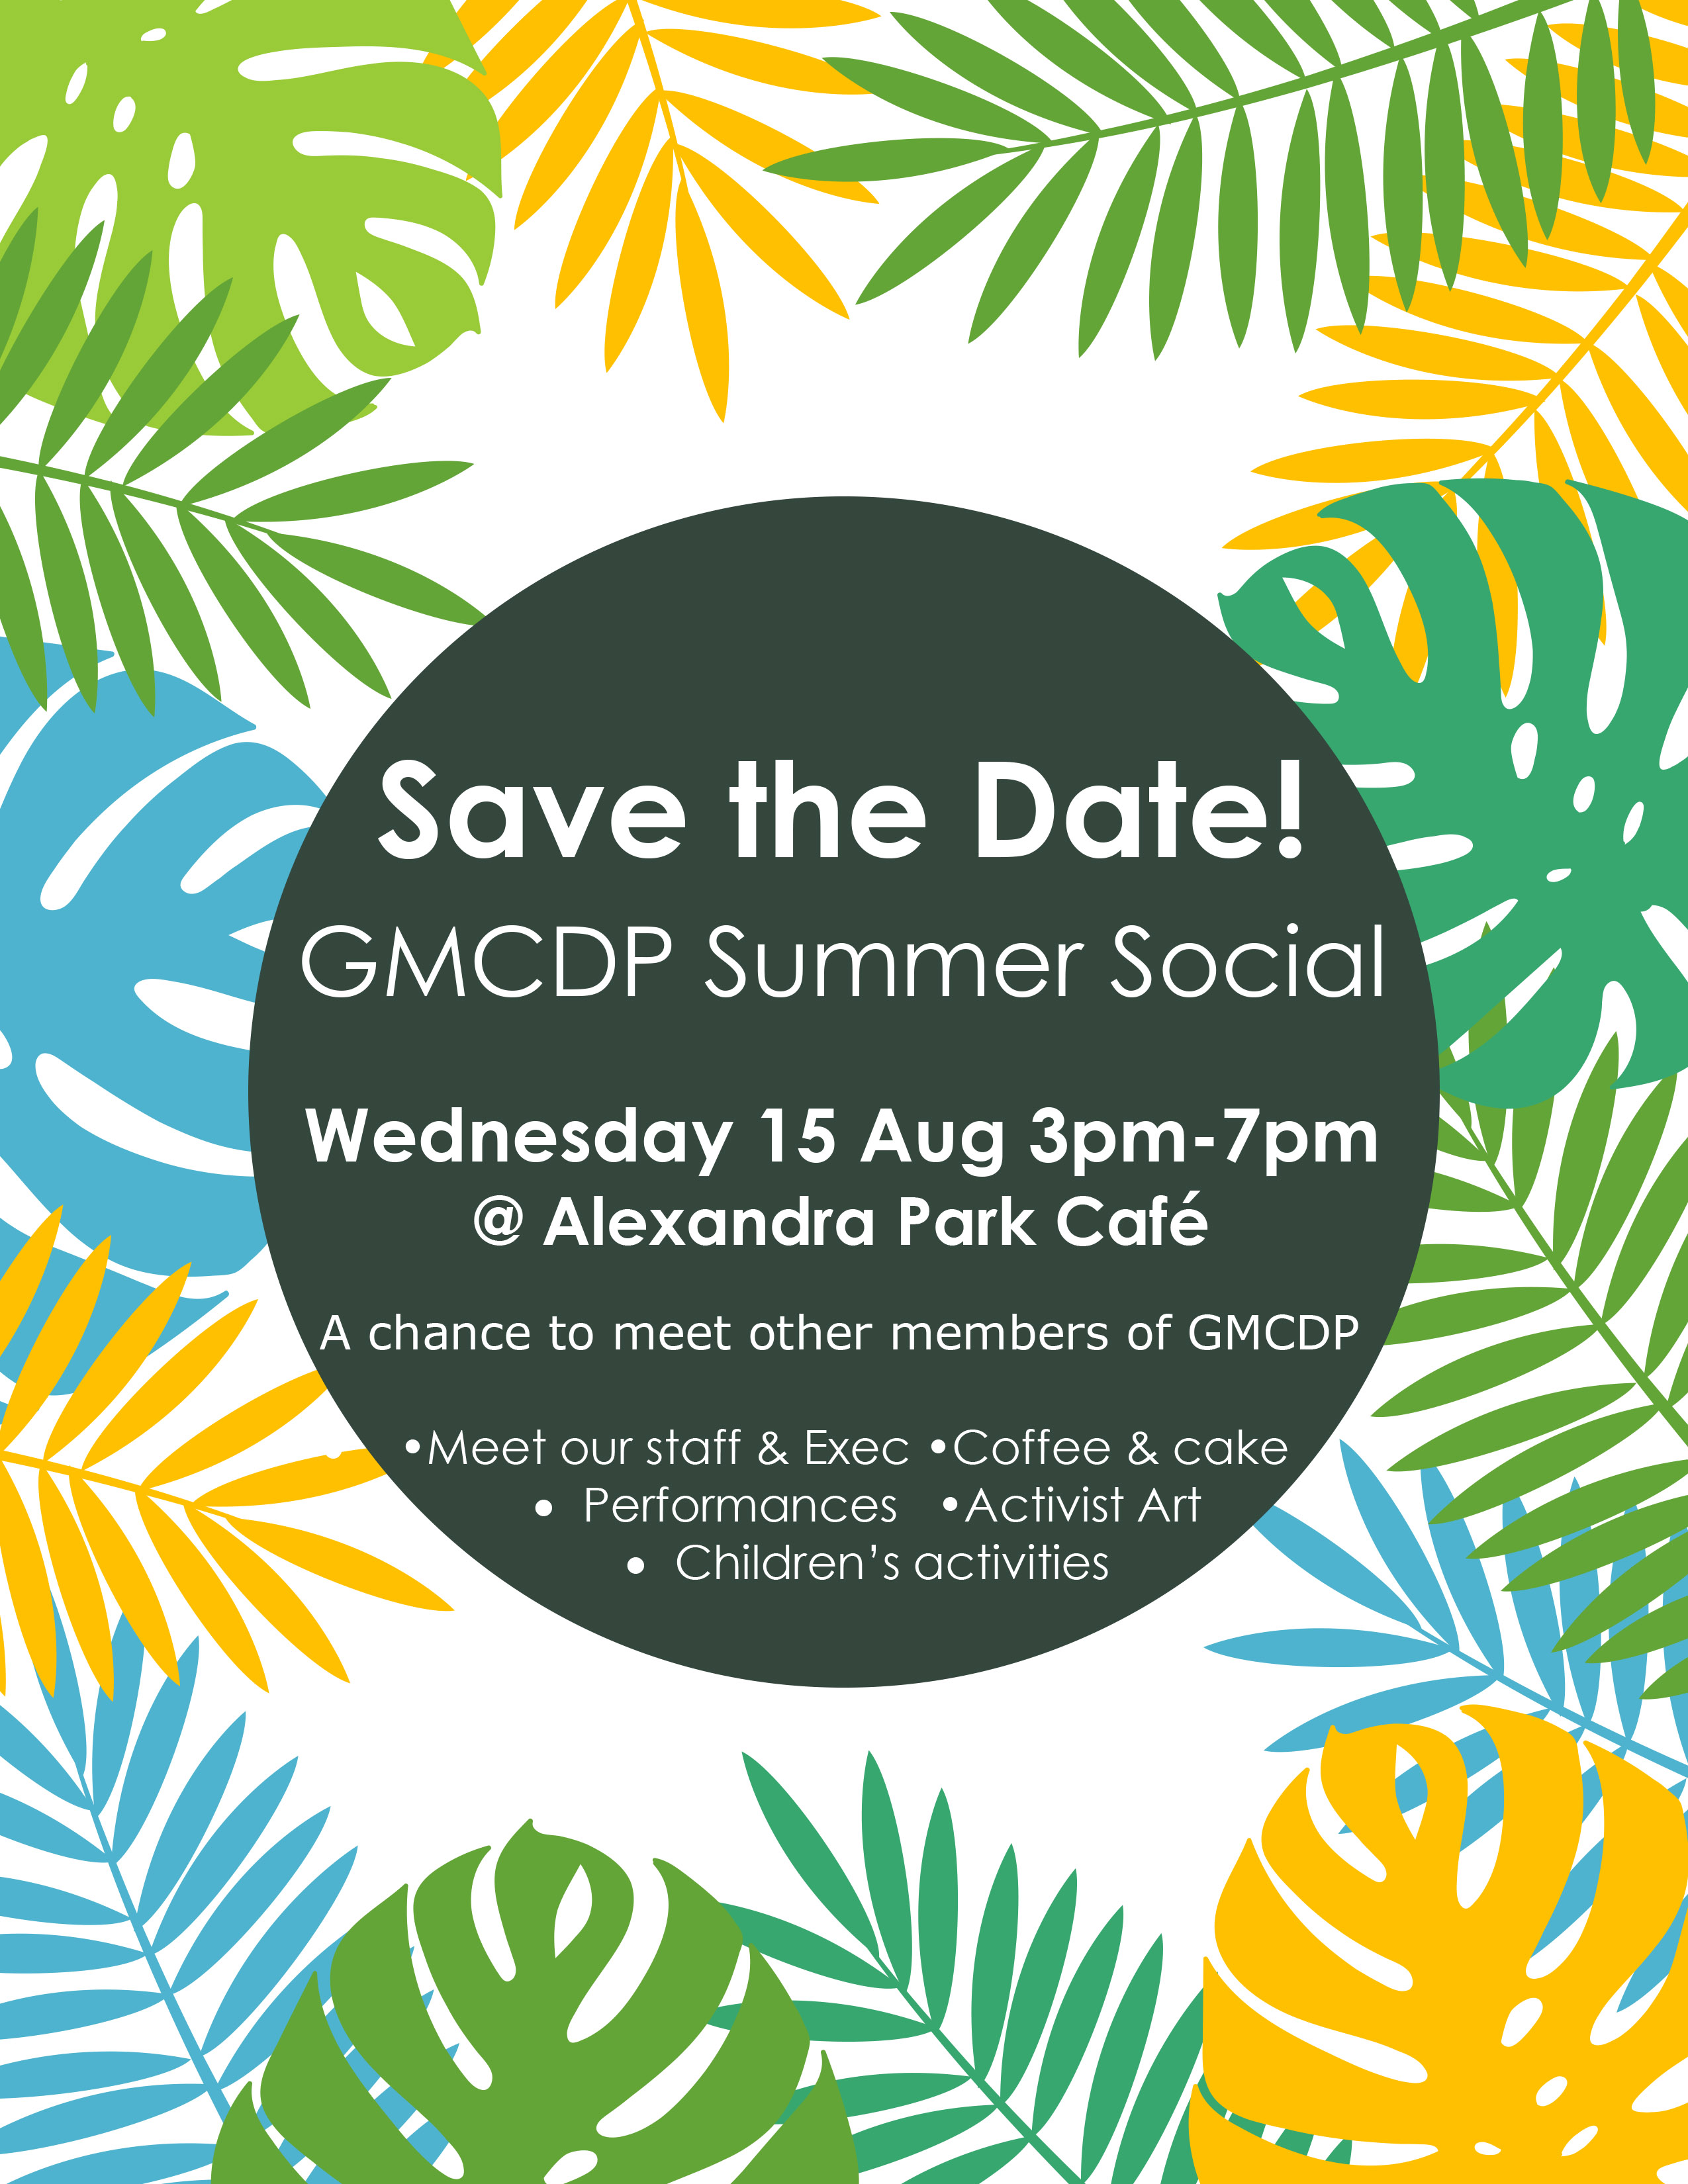 GMCDP is hosting a Summer Social on 15 August. This is a chance to meet other members of GMCDP, and there will also be performances, Activist Art, and children’s activities. We hope to see you there! More information to follow…